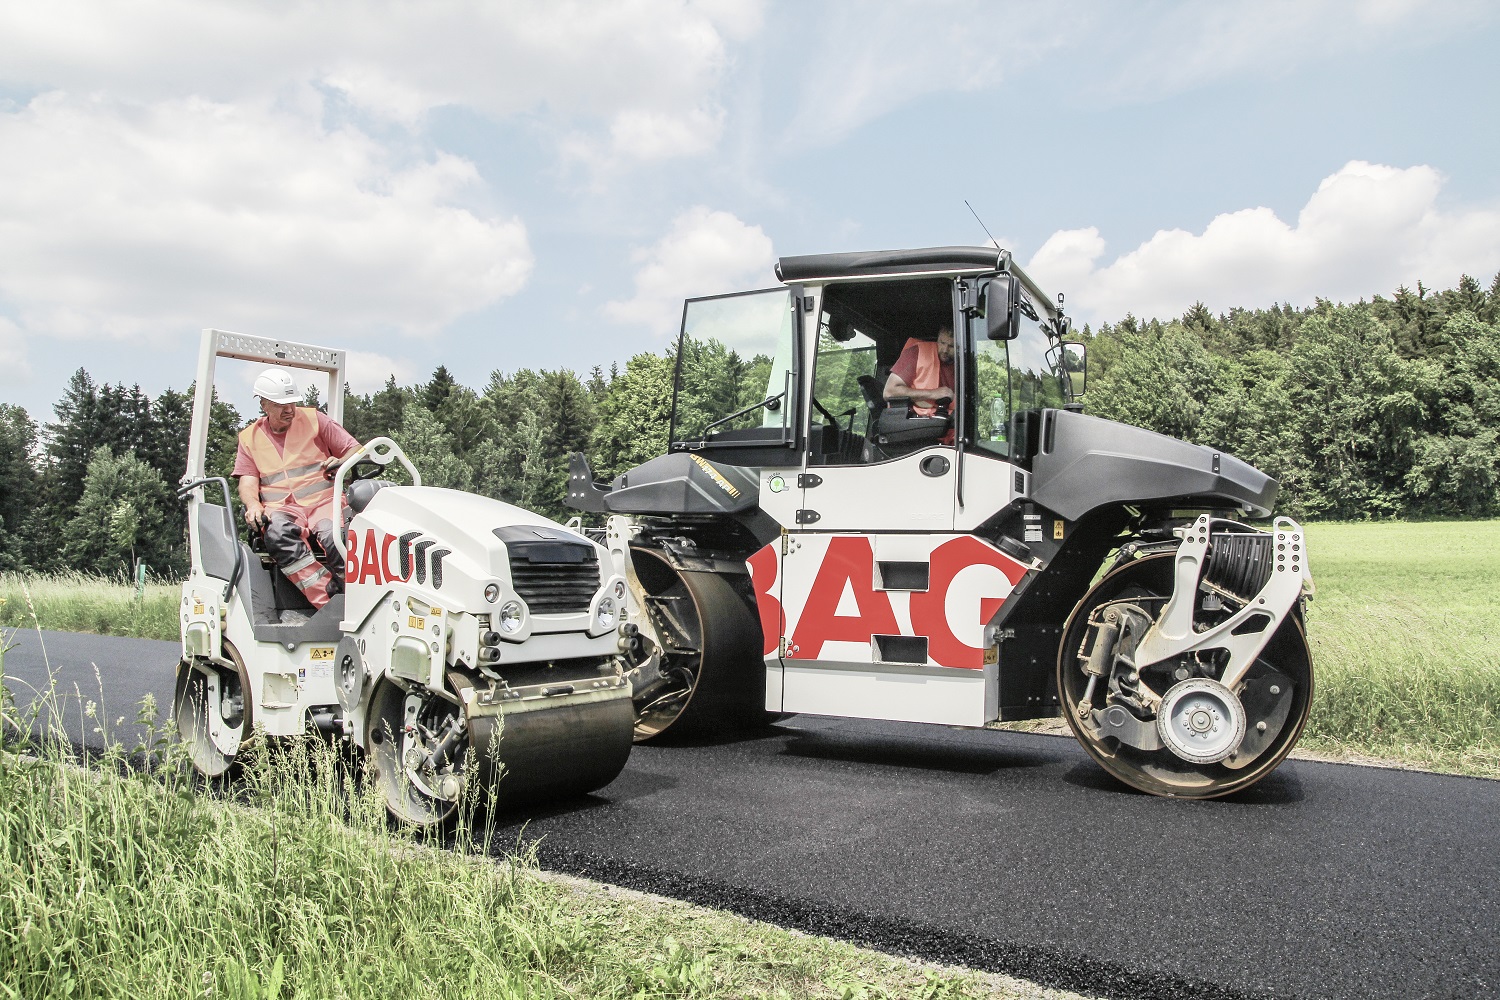 STRABAG continues upgrade of S19 expressway in Poland for € 85 million